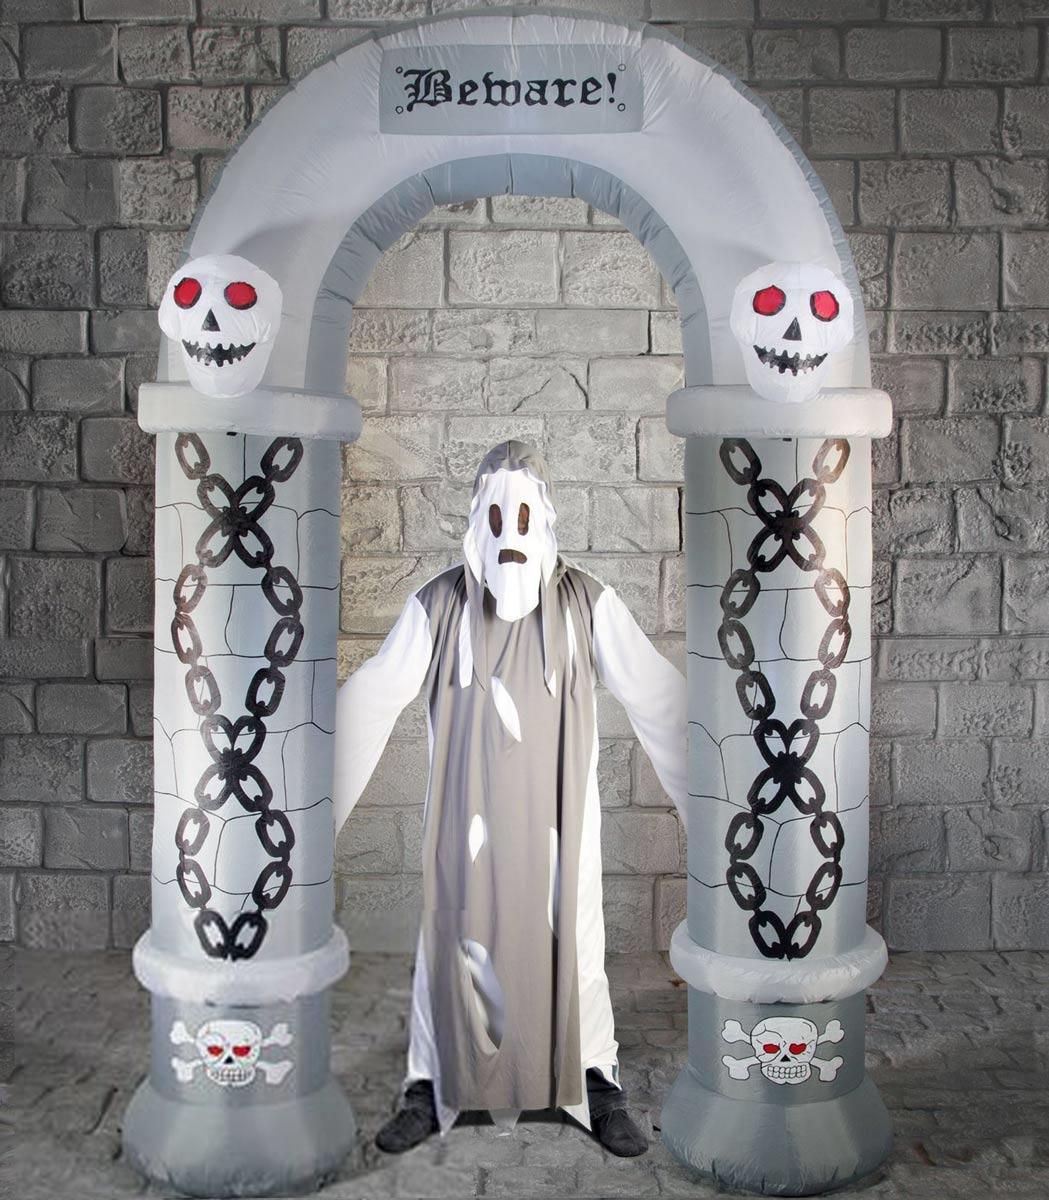 2.7m Outdoor Inflatable Light Up Halloween Cemetery Arch Archway by Premier HL167038 available here at Karnival Costumes online Halloween party shop